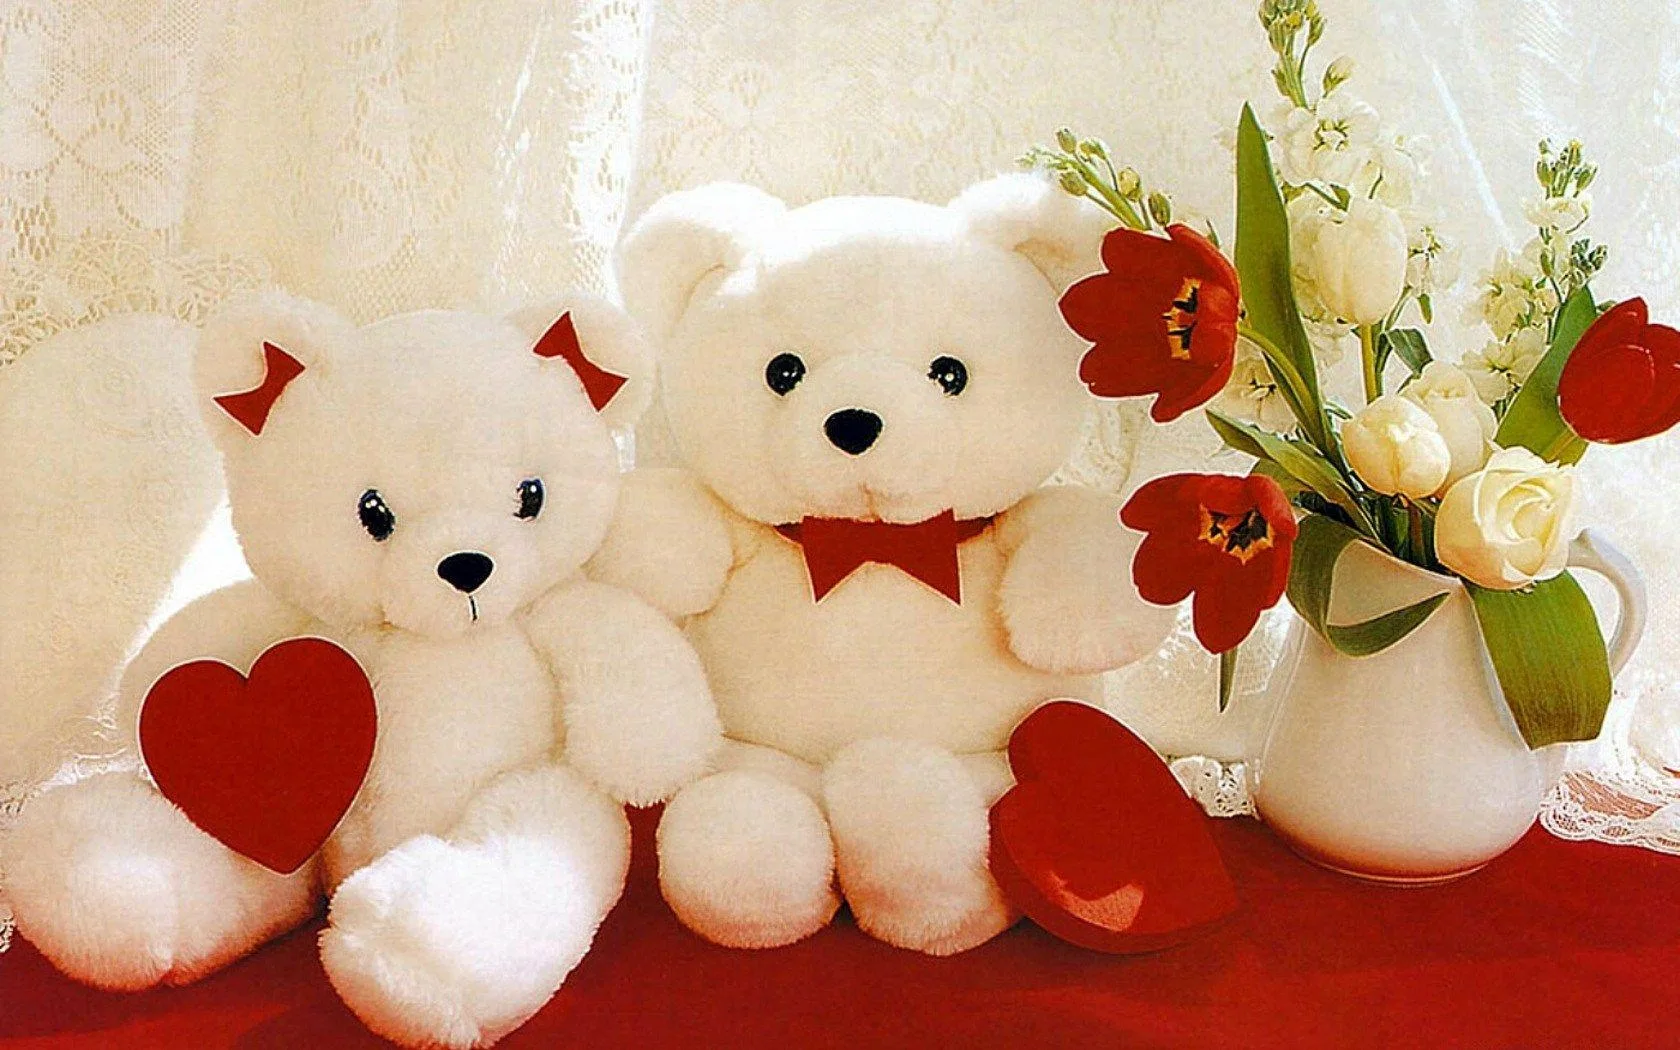 Teddy Day: A Fuzzy Celebration of Love and Comfort